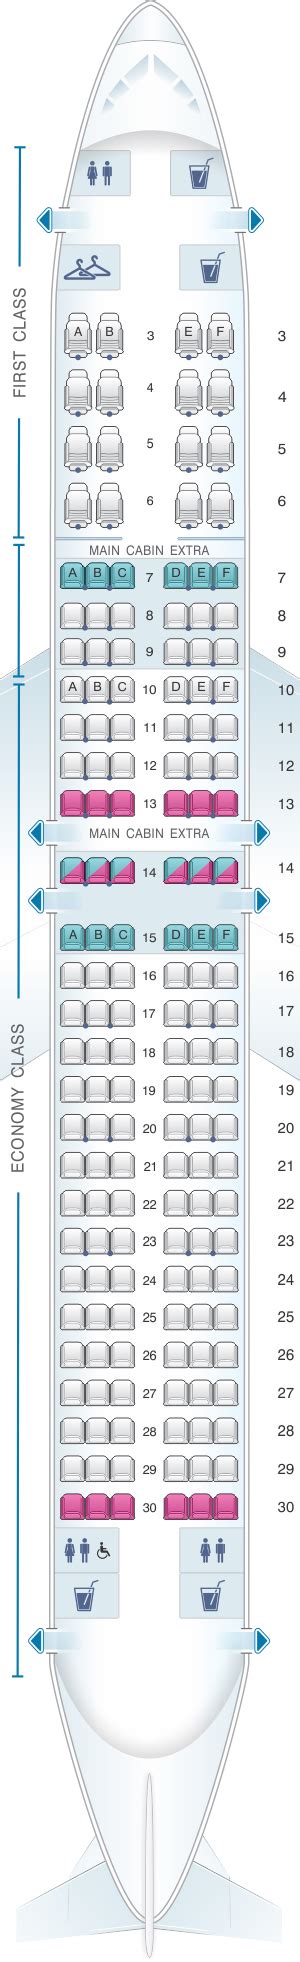 The COPA Boeing 737-800 features 160 seats in a 2 cabin configuration. Economy has 144 seats in a 3-3 config; Business class has 16 seats in a 2-2 config; this is pretty standard for these aircraft. Legroom-wise, the Economy pitch of 31"" is average, the Business class pitch of 38"" is average, though of course what that means for you depends .... 